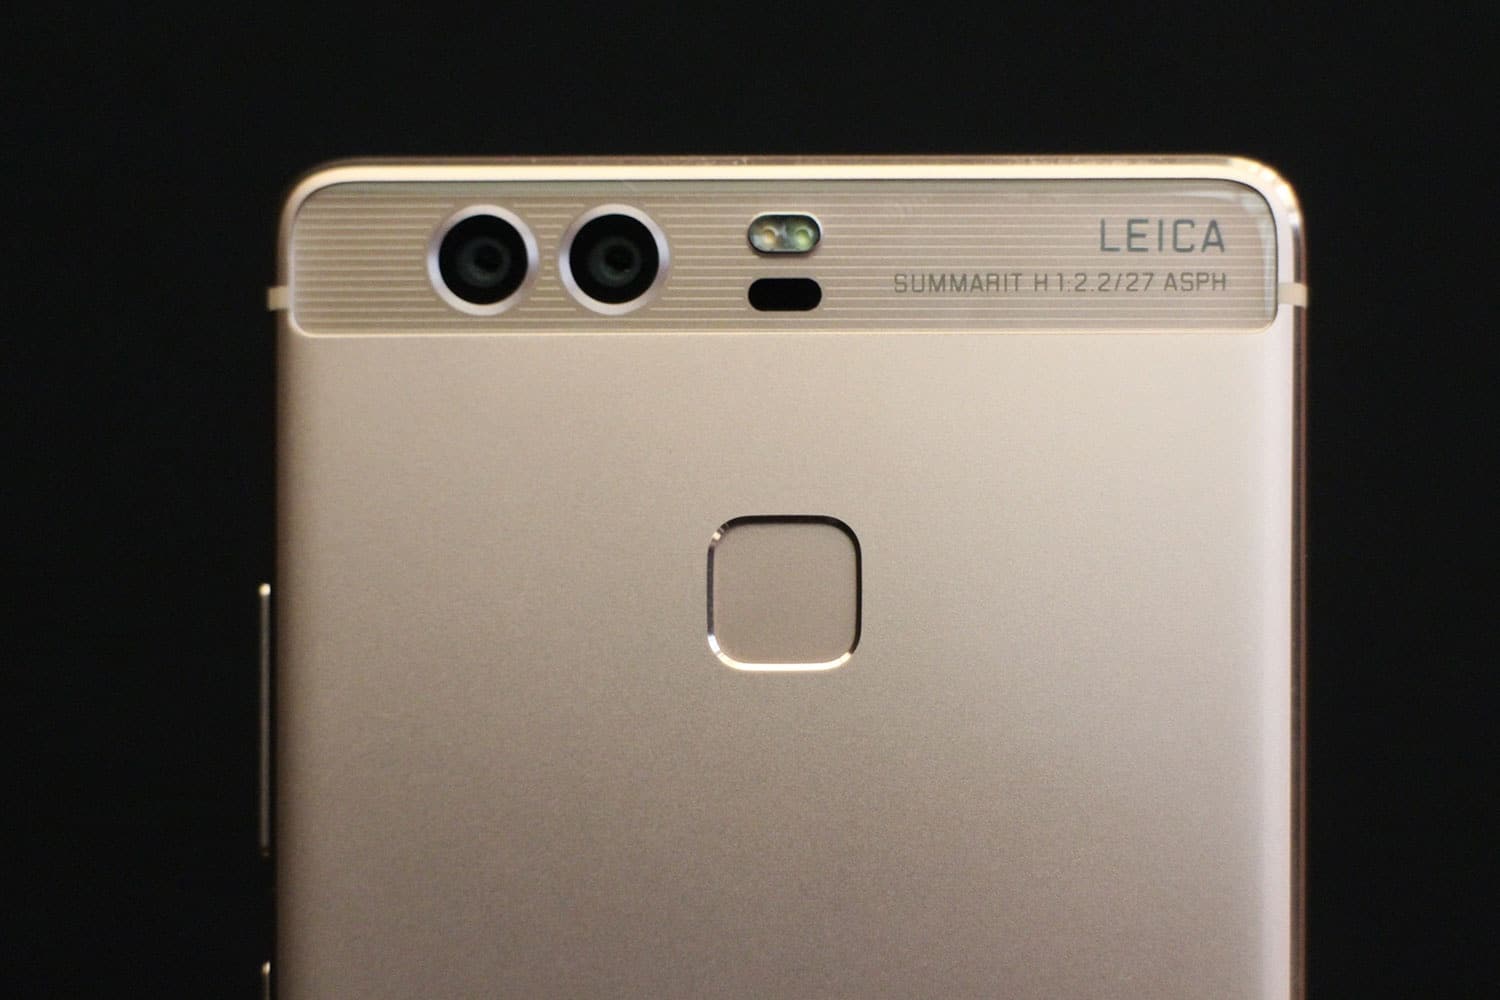 Huawei P9 features